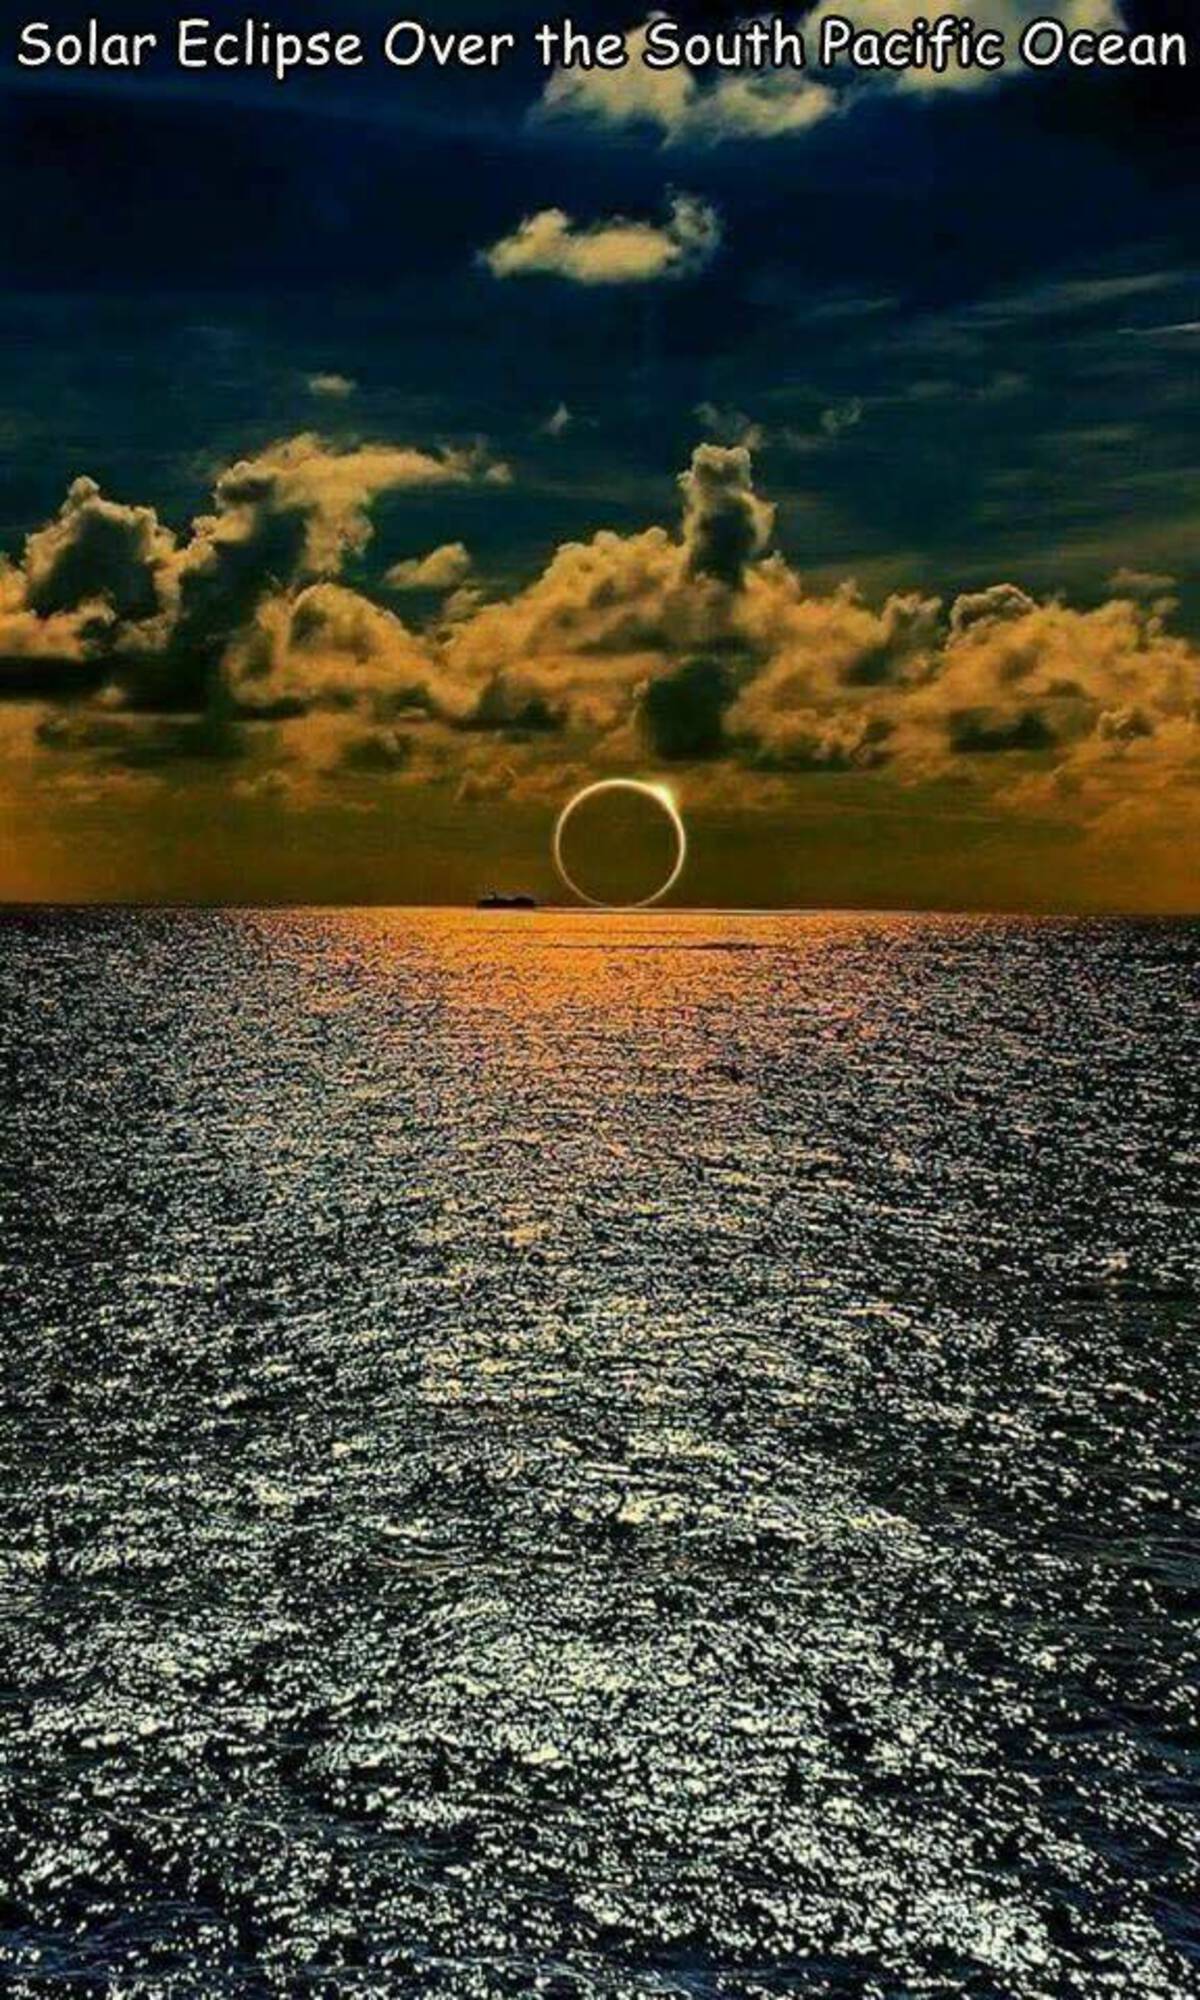 total eclipse sunset - Solar Eclipse Over the South Pacific Ocean